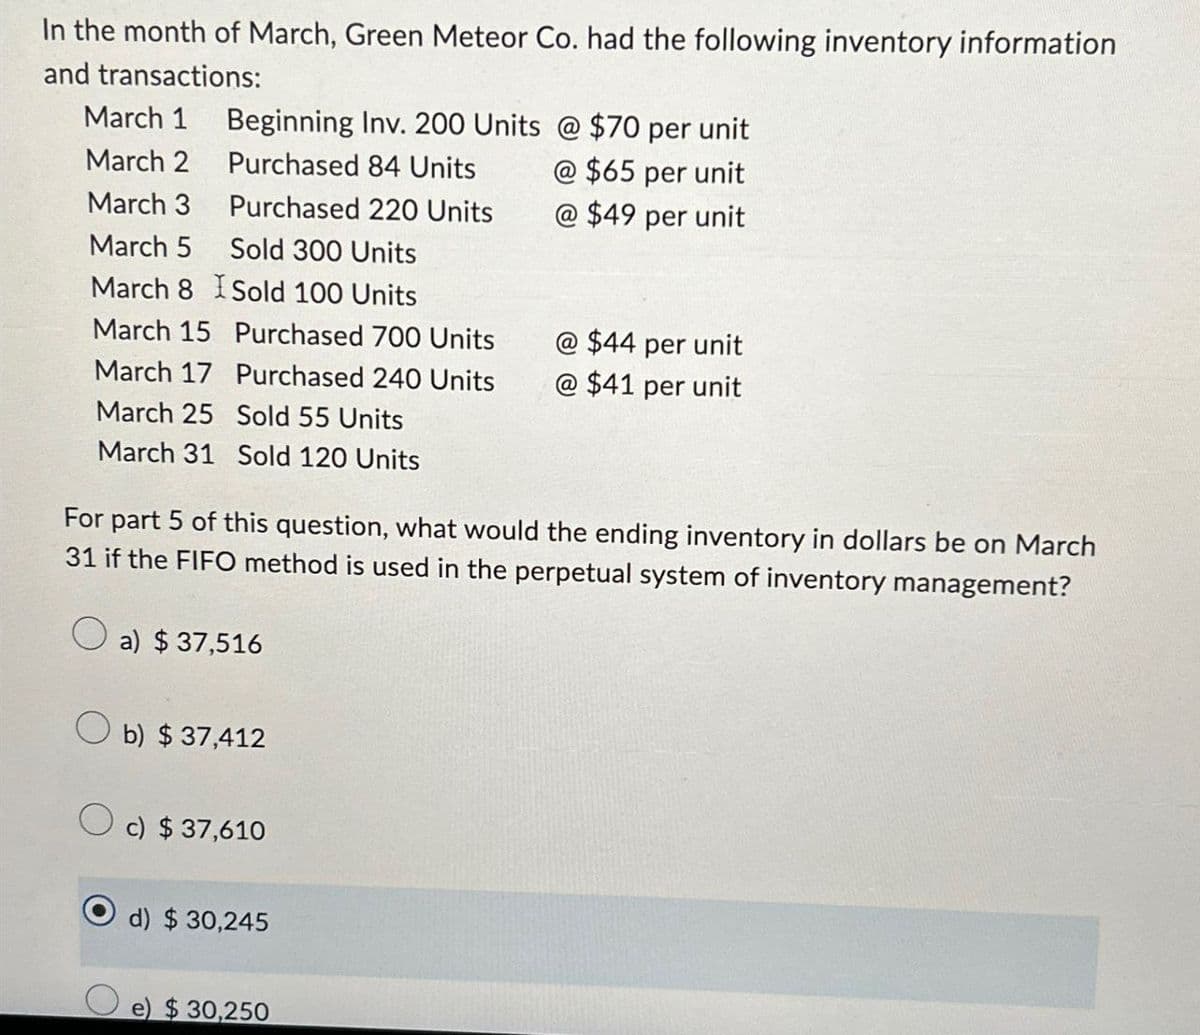 In the month of March, Green Meteor Co. had the following inventory information
and transactions:
March 1
Beginning Inv. 200 Units @ $70 per unit
March 2
Purchased 84 Units
@ $65 per unit
March 3
Purchased 220 Units
@ $49 per unit
March 5 Sold 300 Units
March 8
Sold 100 Units
March 15
Purchased 700 Units
@ $44 per unit
March 17 Purchased 240 Units
@ $41 per unit
March 25
Sold 55 Units
March 31 Sold 120 Units
For part 5 of this question, what would the ending inventory in dollars be on March
31 if the FIFO method is used in the perpetual system of inventory management?
a) $ 37,516
b) $ 37,412
c) $ 37,610
d) $ 30,245
e) $ 30,250